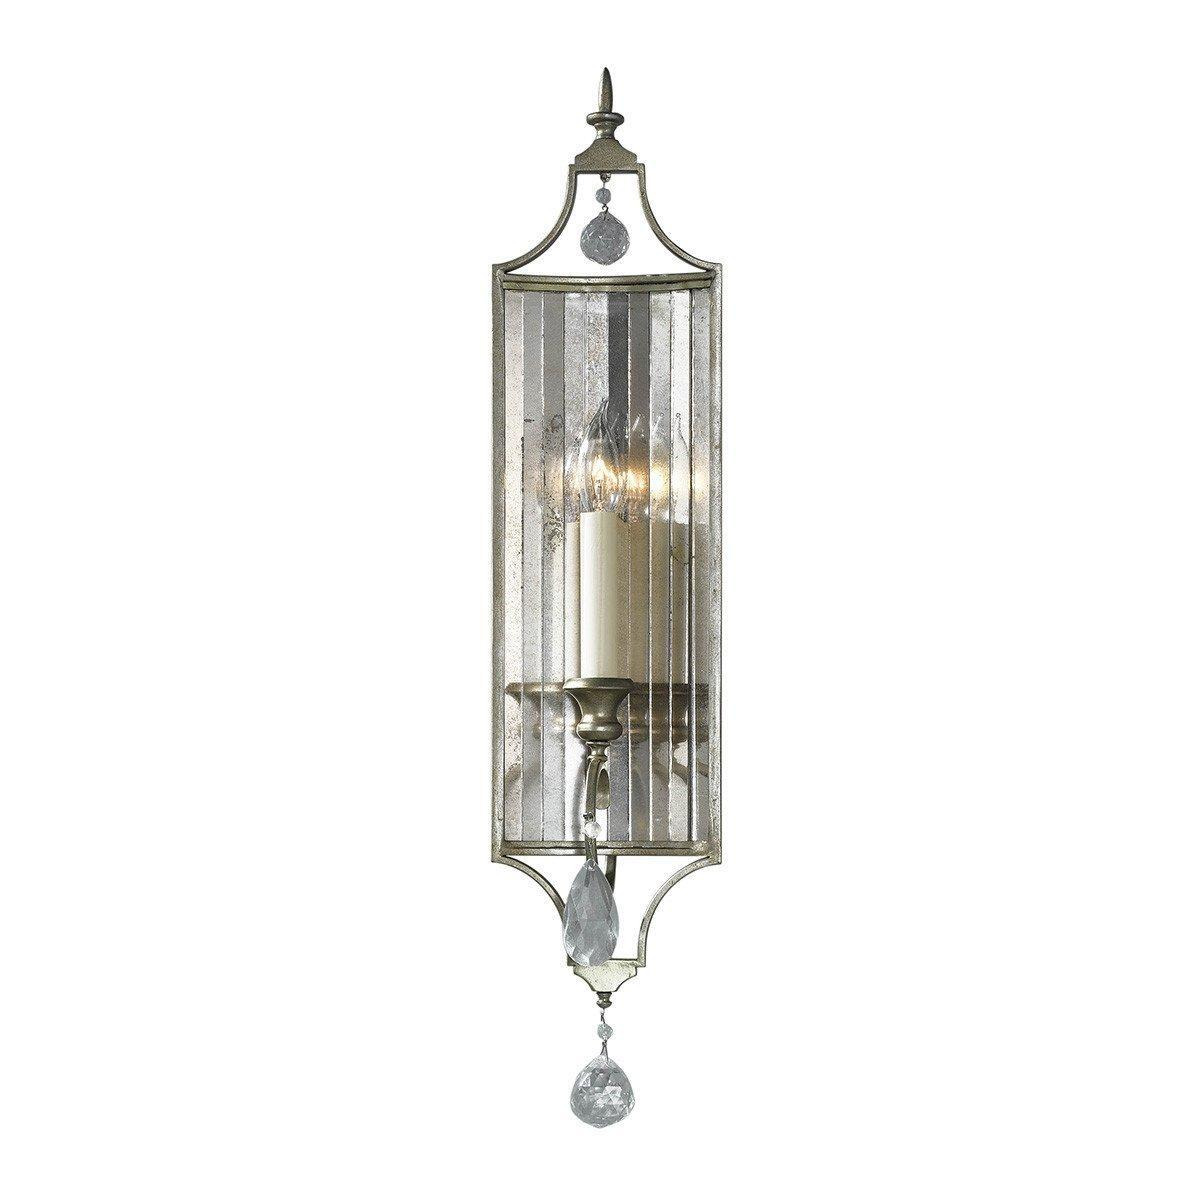 Gianna 1 Light Indoor Candle Wall Light Silver E14 - image 1